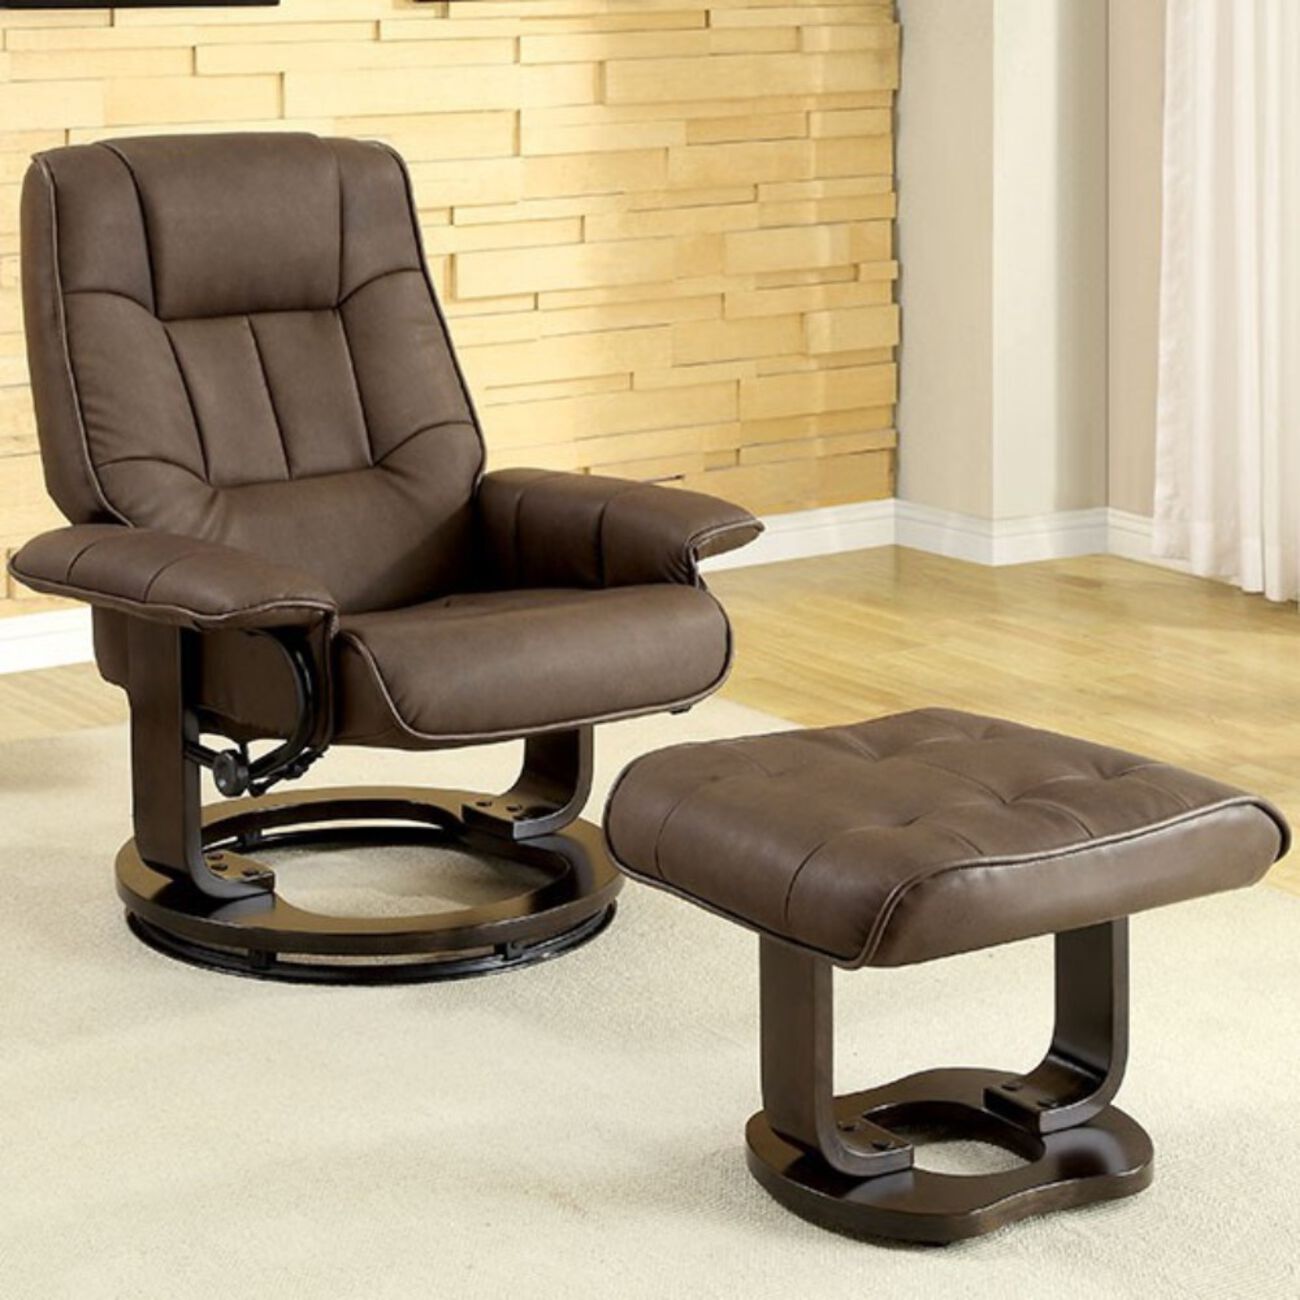 Modish Multifunctional Swivel Lounger Chair With Ottoman, Brown